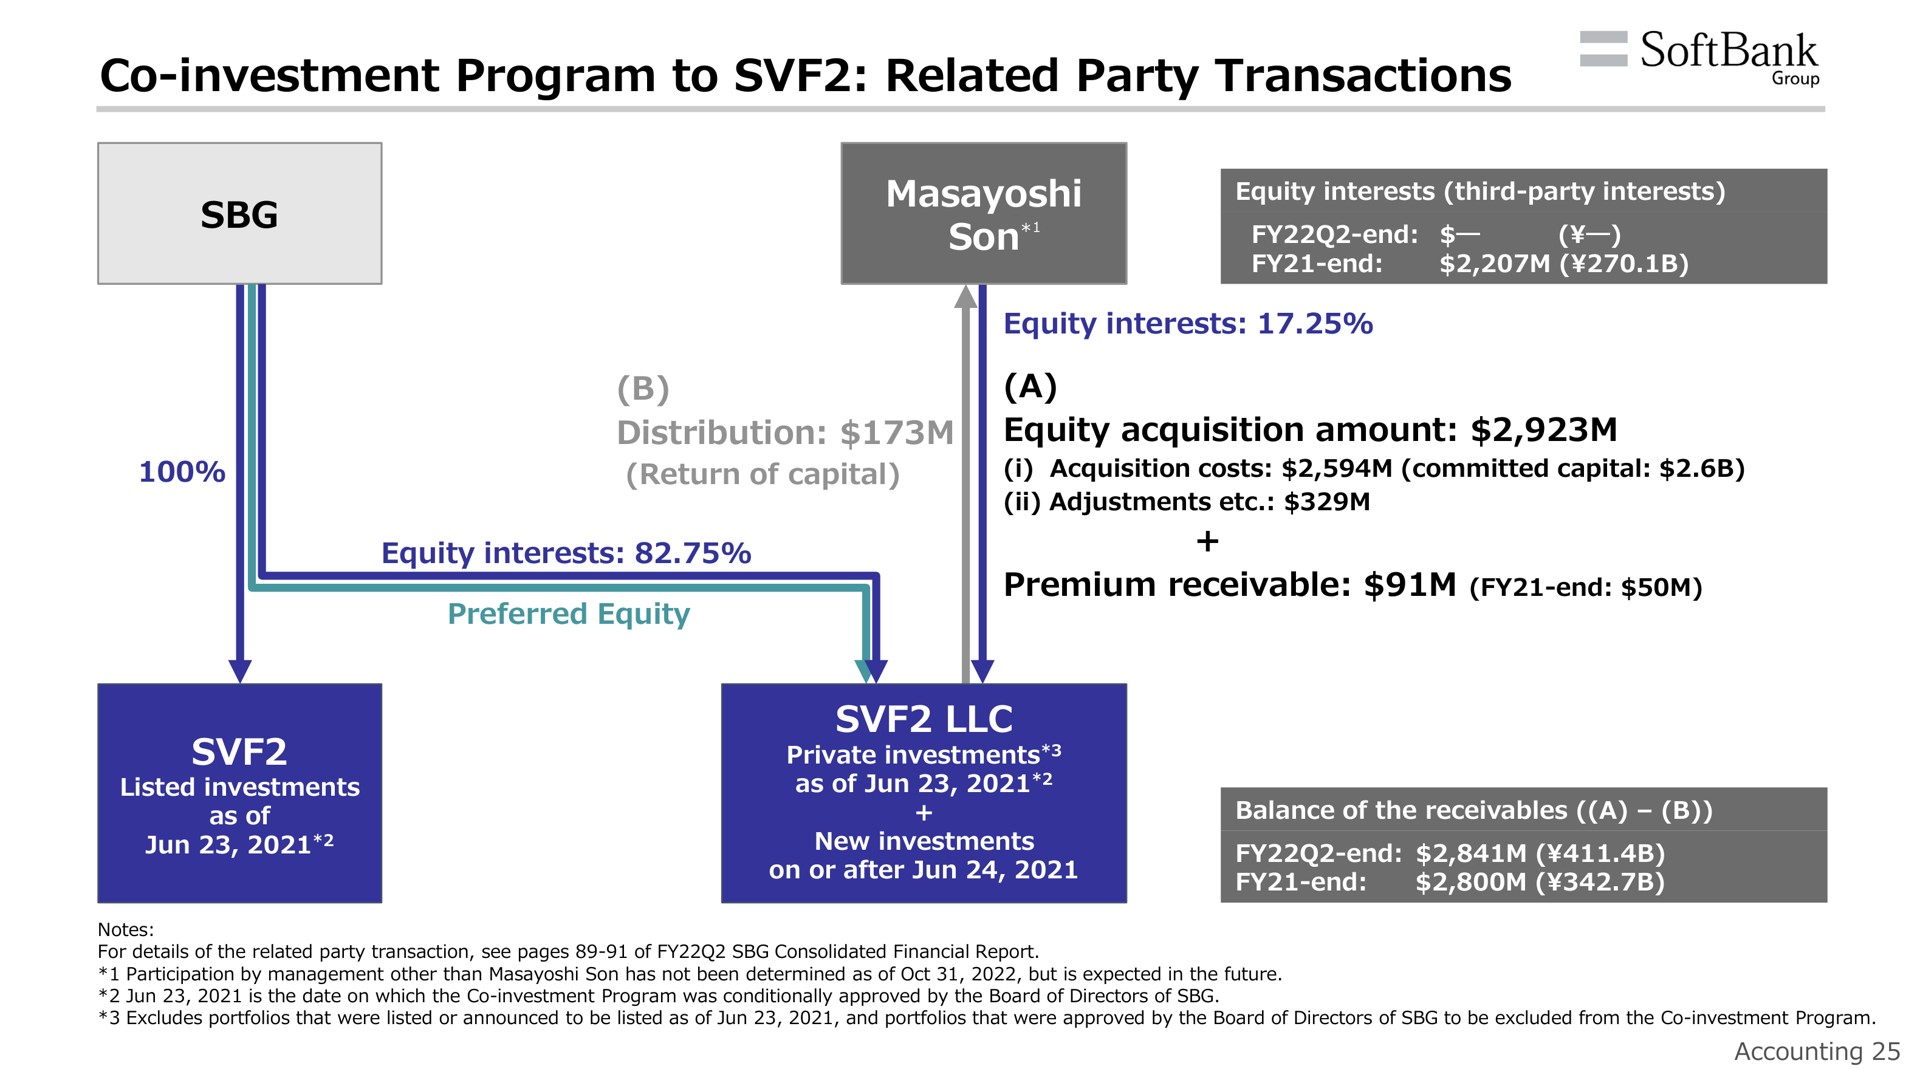 investment program to related party transactions son a | SoftBank